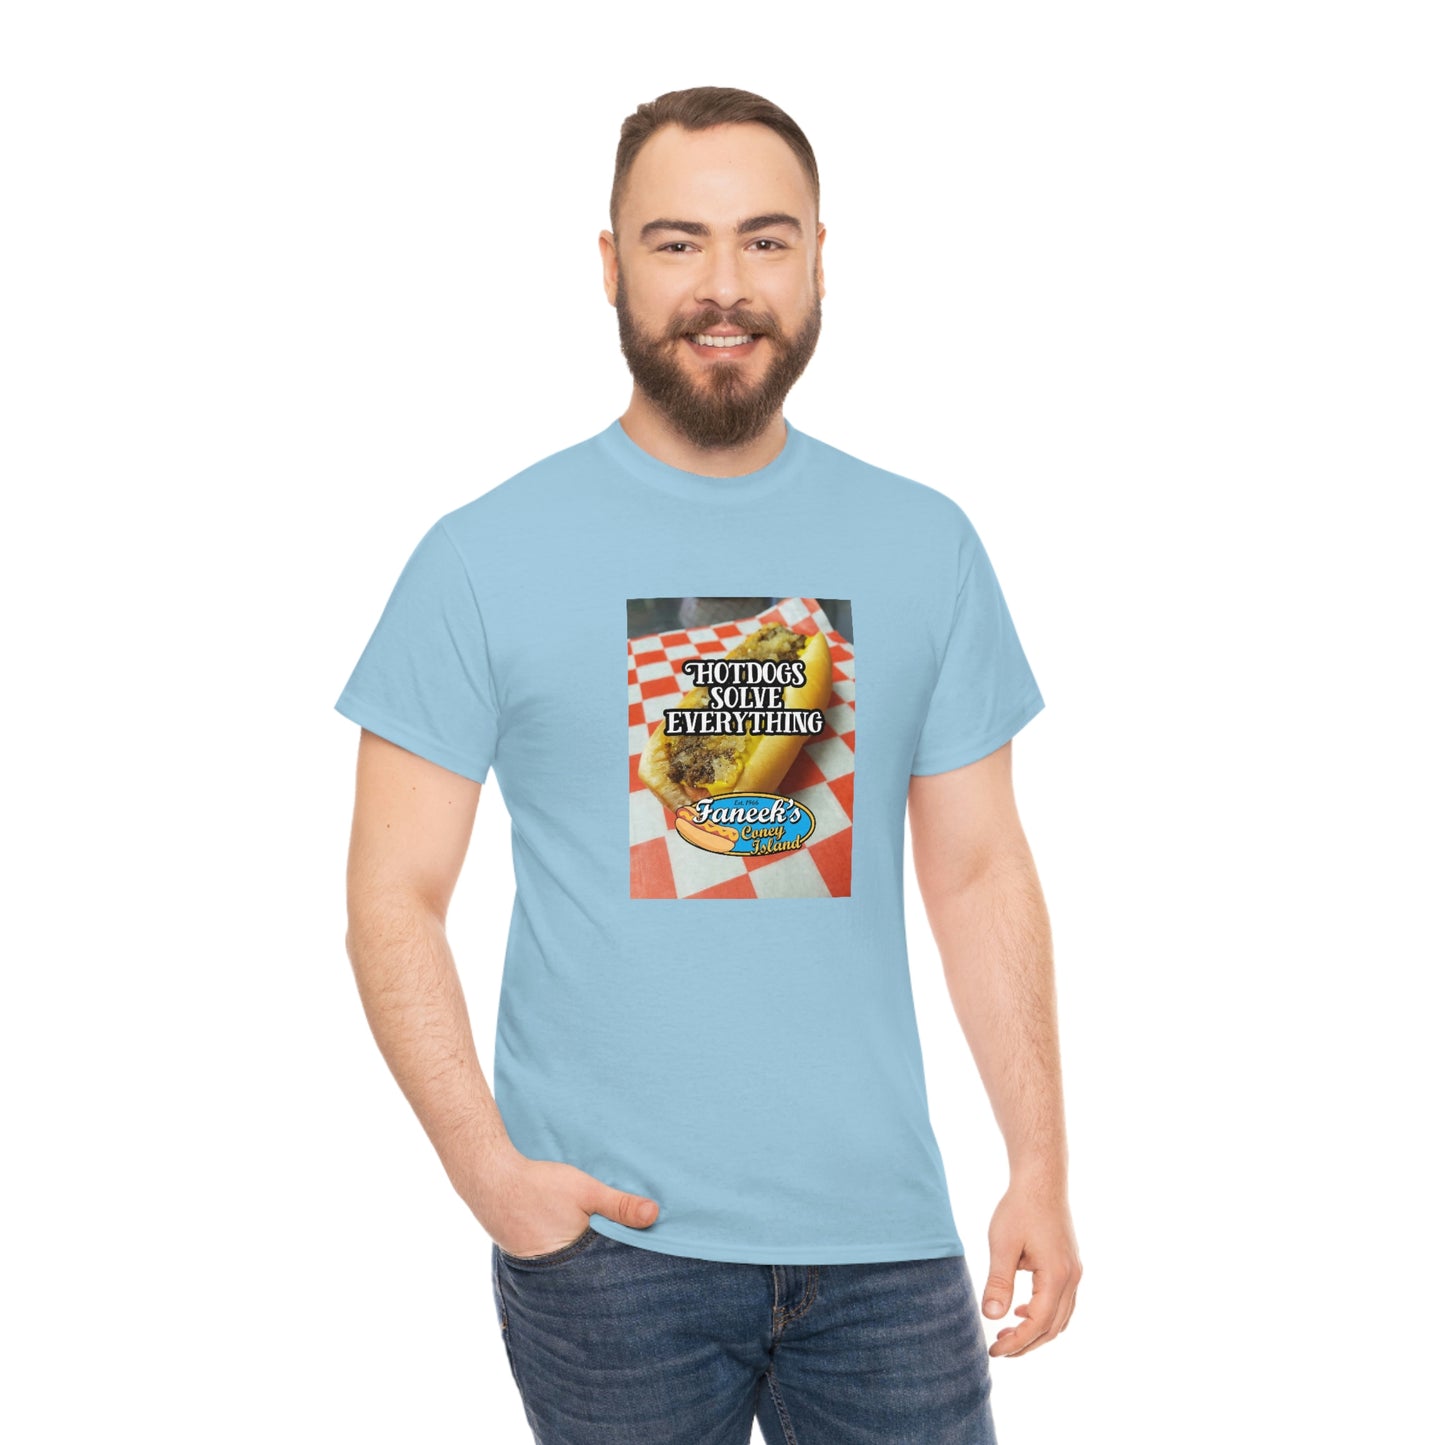 Hot dogs solve everything Tee